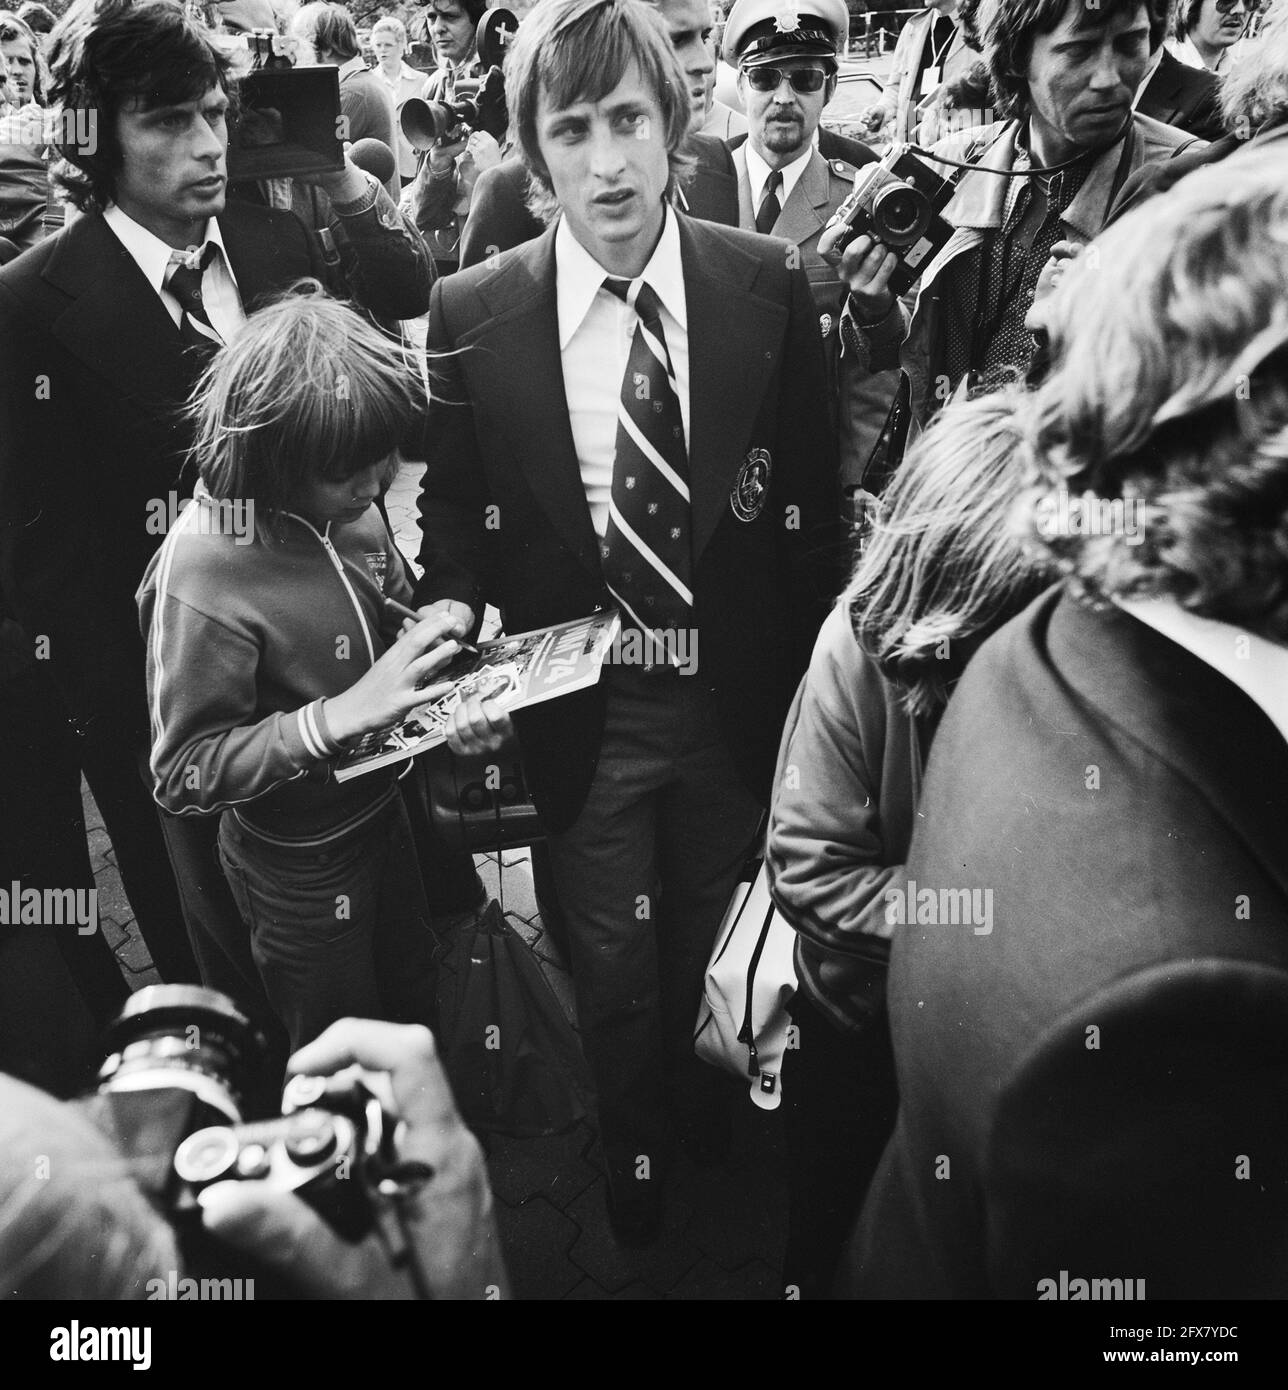 Arrival Dutch national team in Hiltrup ( West Germany ) World Cup 1974; Neeskens signs autographs, June 12, 1974, MANUALKS, teams, sports, soccer, The Netherlands, 20th century press agency photo, news to remember, documentary, historic photography 1945-1990, visual stories, human history of the Twentieth Century, capturing moments in time Stock Photo